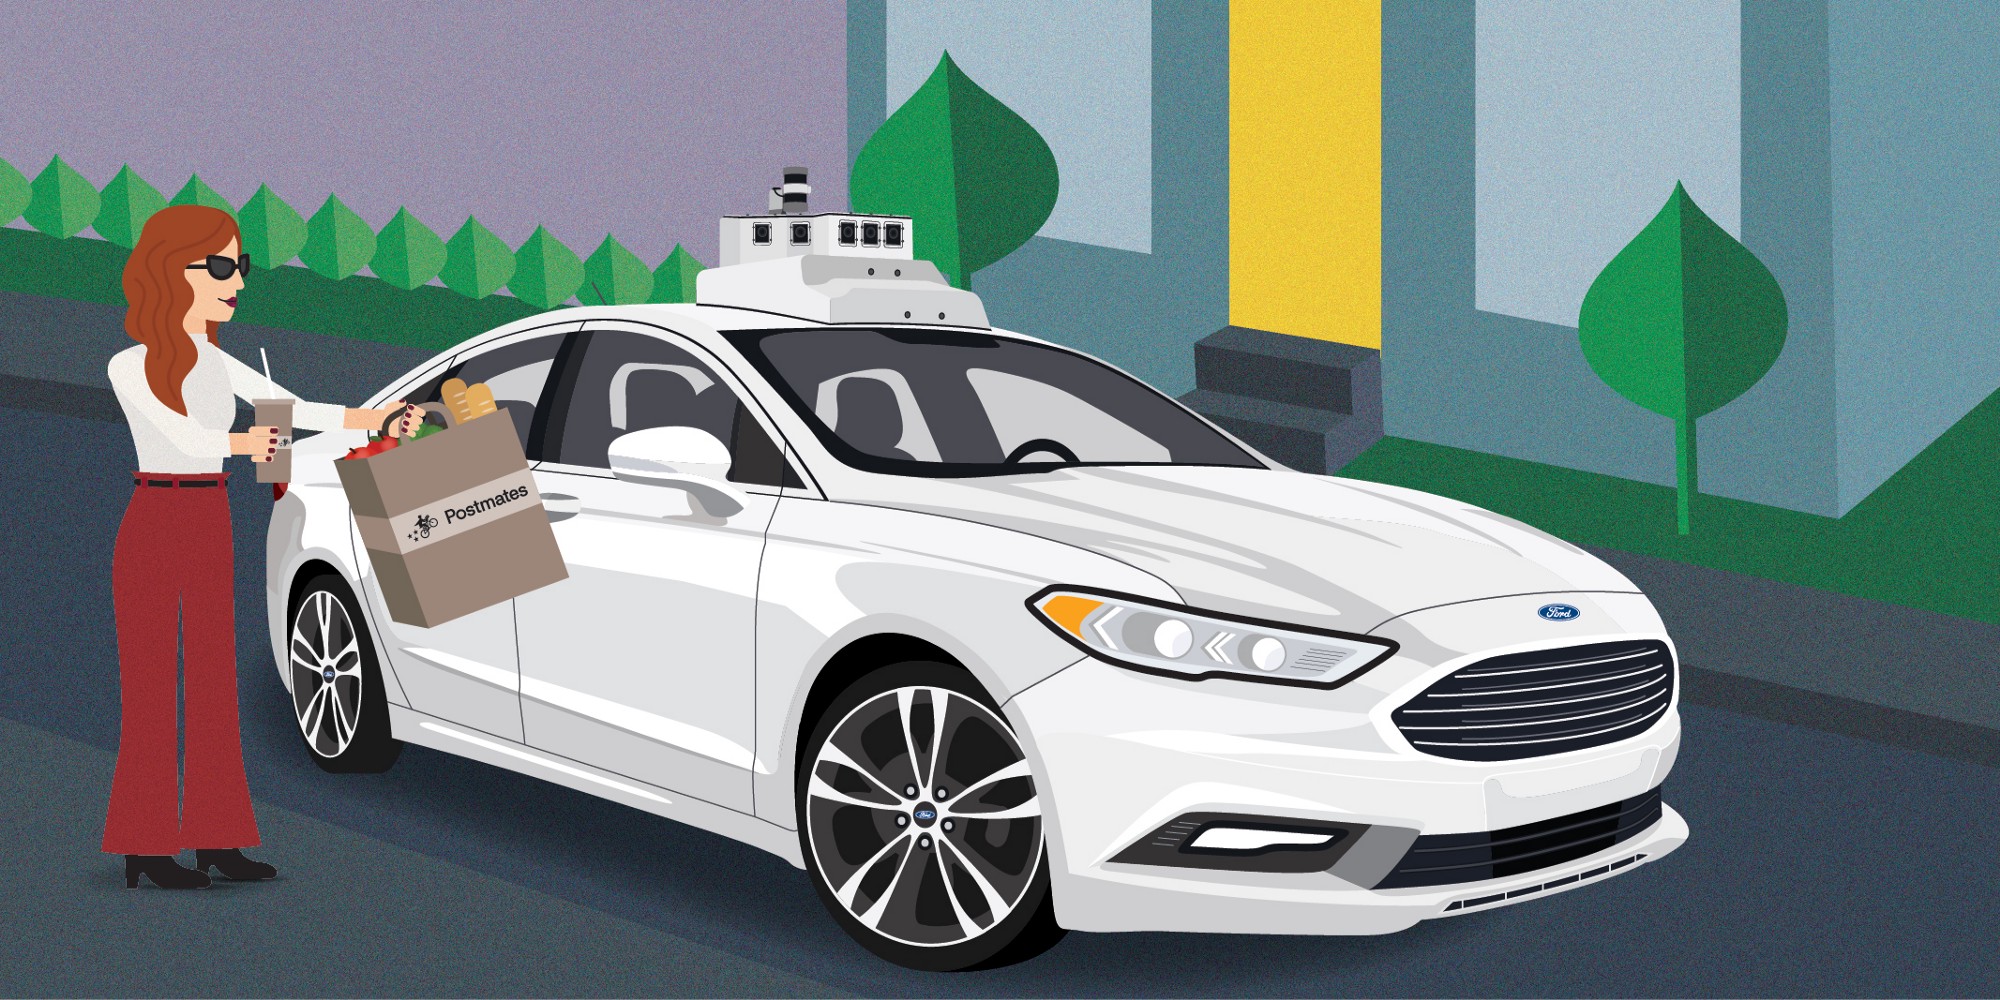 Why Teaming with Postmates Will Help Ford Expand On-Demand Delivery ...